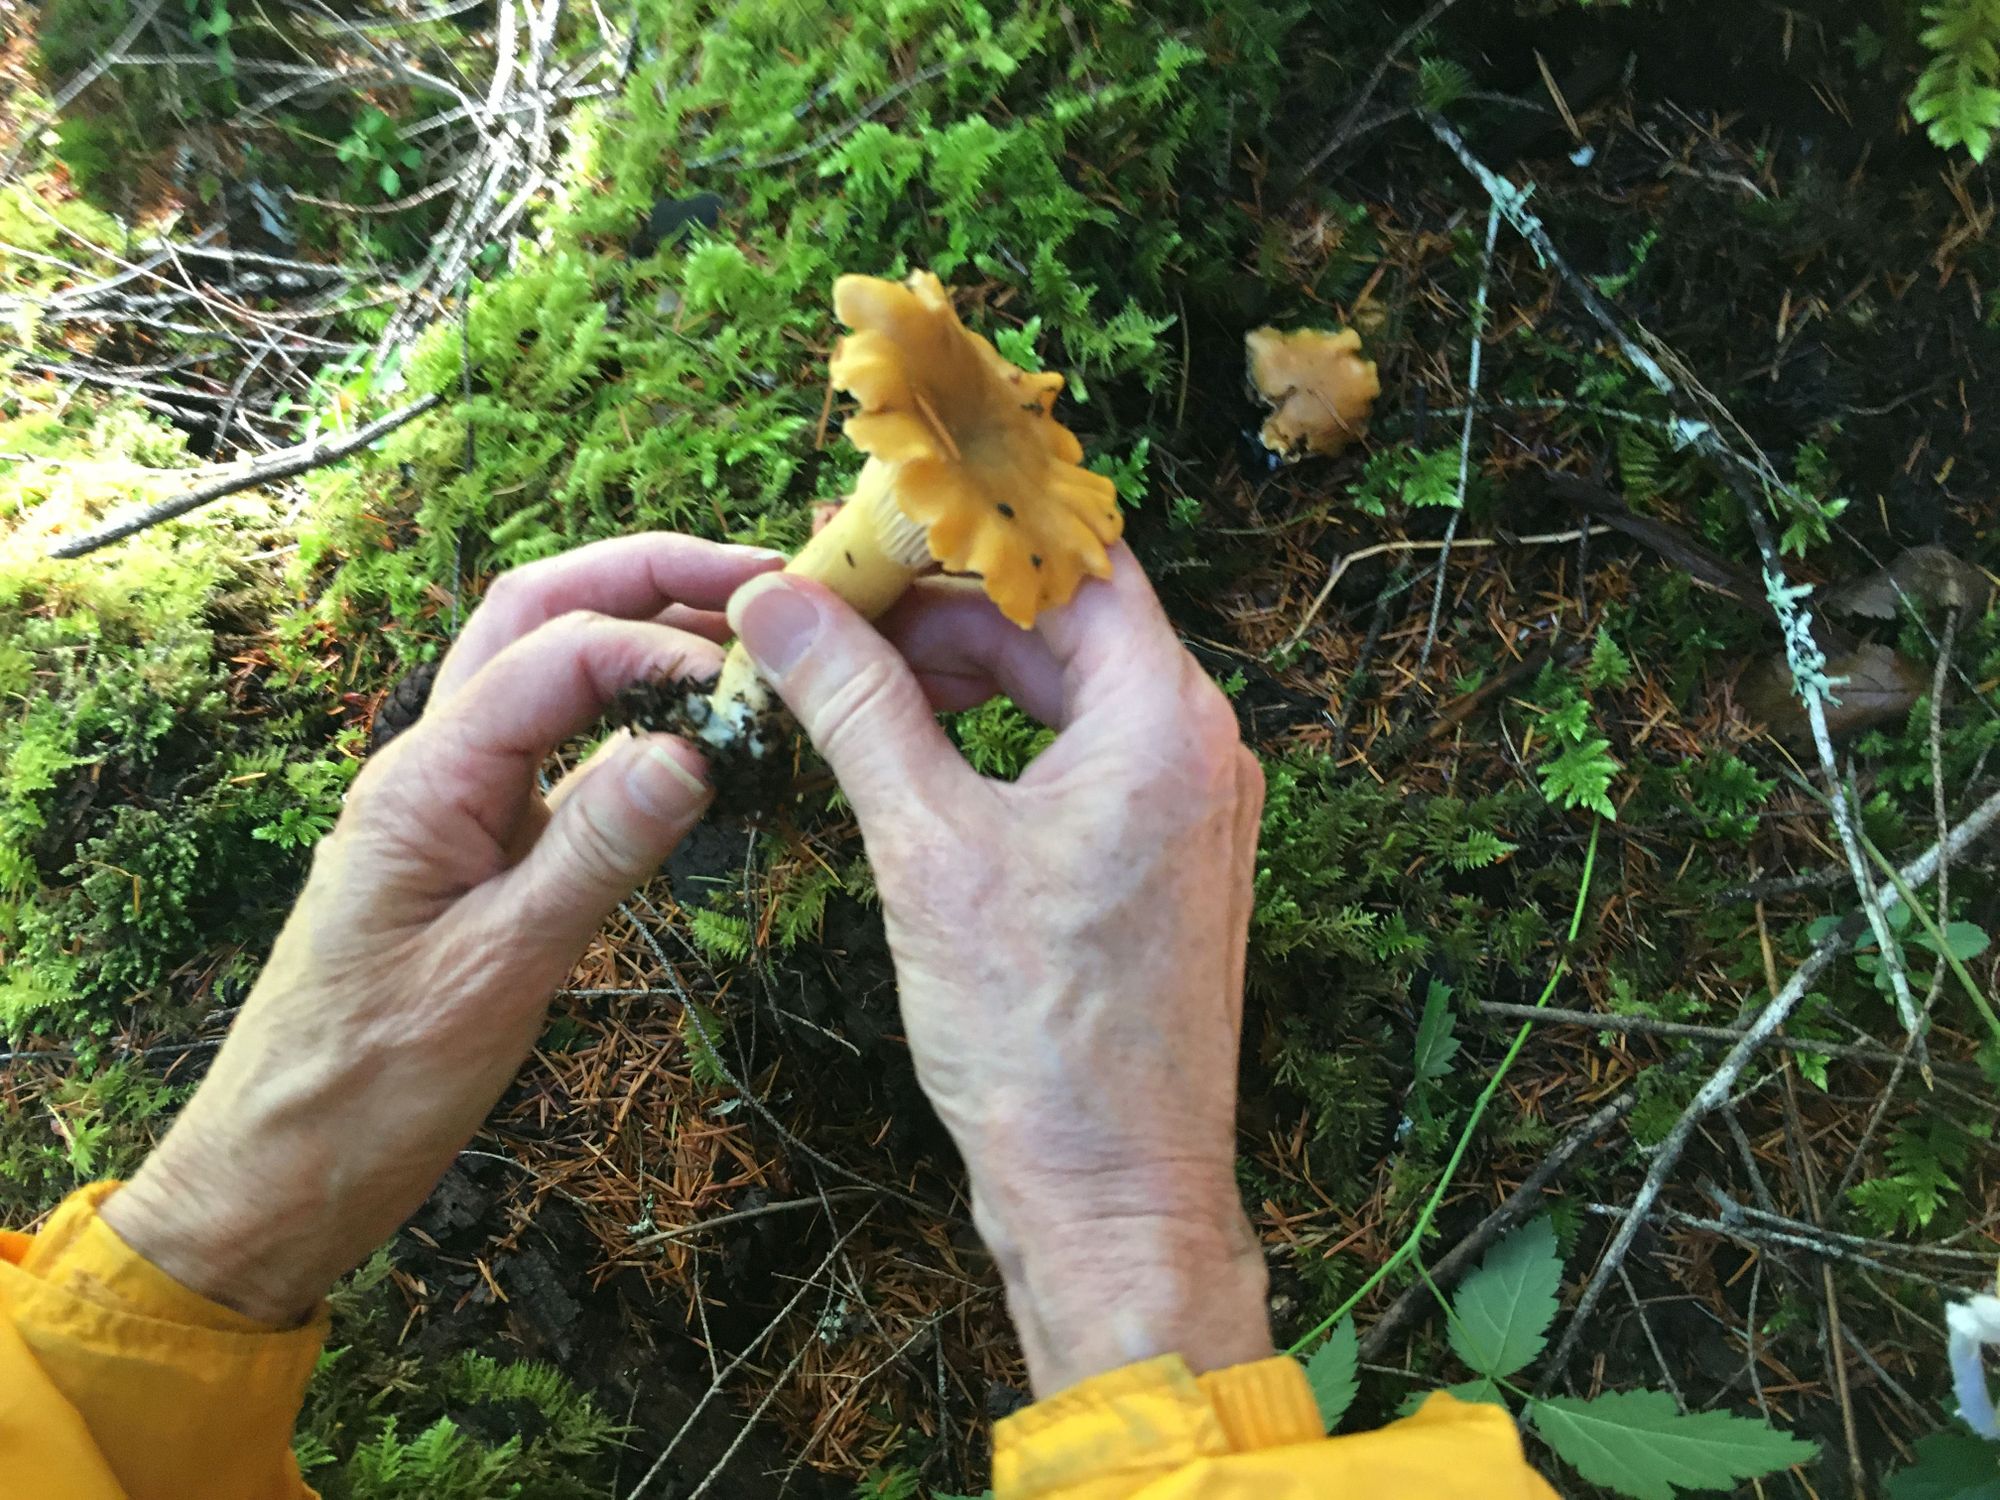 Hands holding a chanterelle mushroom that’s been pulled out of a mossy forest floor.